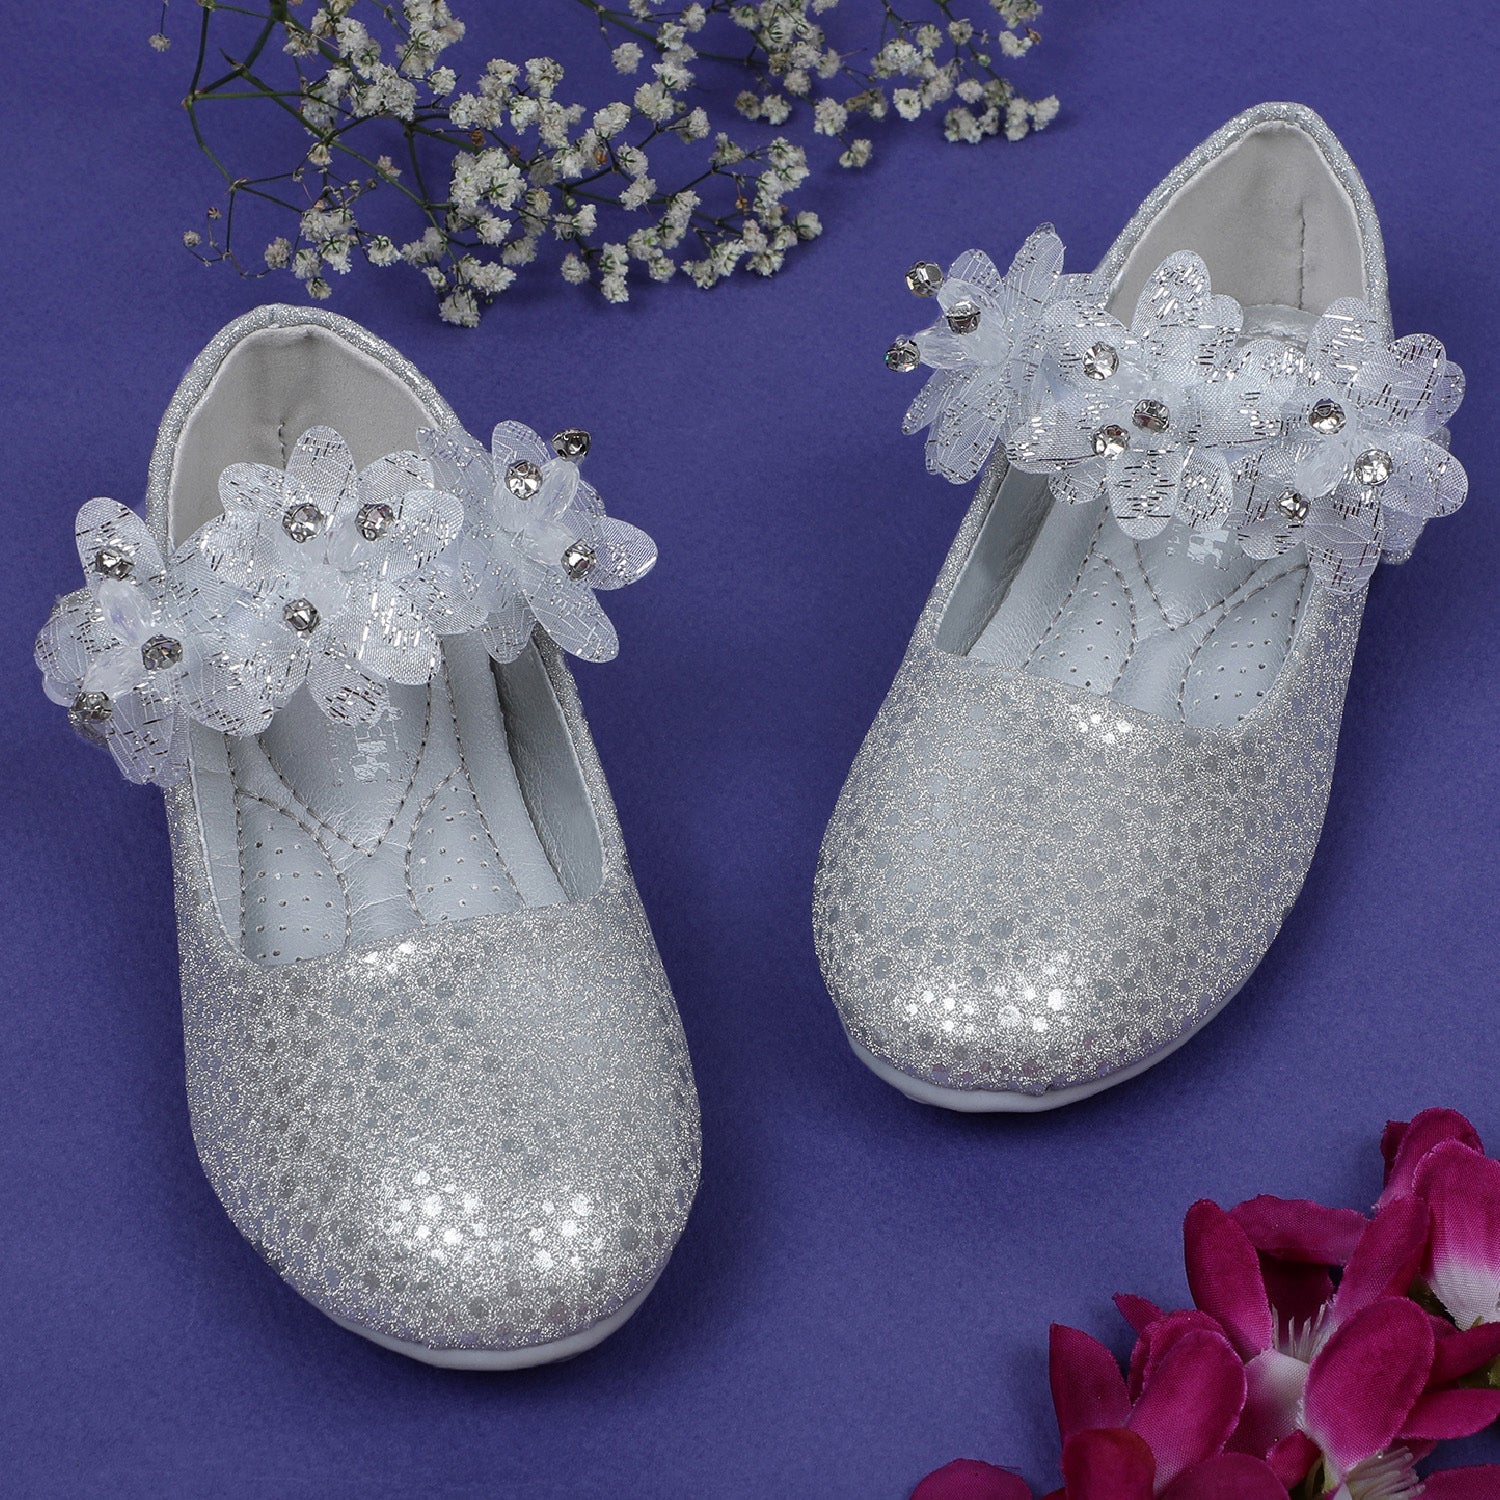 Baby Moo x Bash Kids Princess Floral Party Mary Jane Ballerinas - Silver